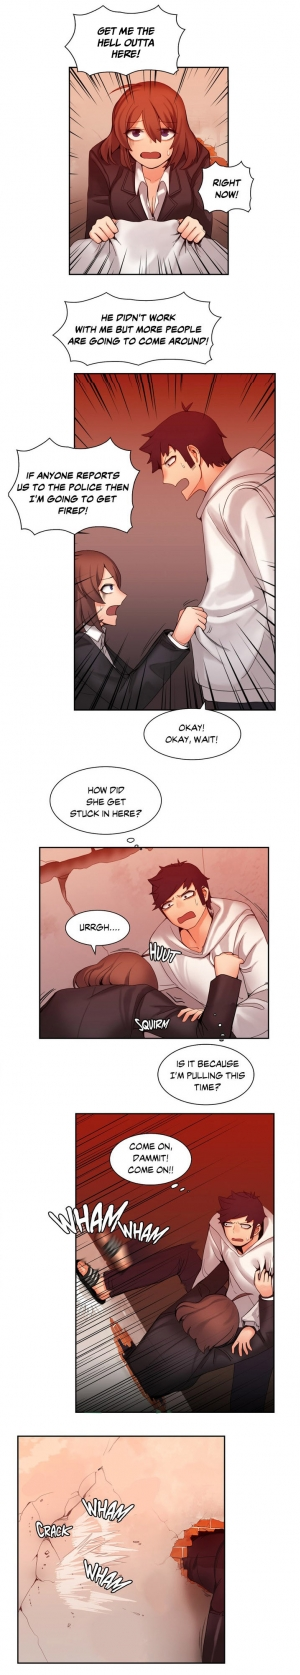 [Gaehoju, Gunnermul] The Girl That Got Stuck in the Wall Ch.11/11 [COMPLETED] [English] [Hentai Universe] - Page 115